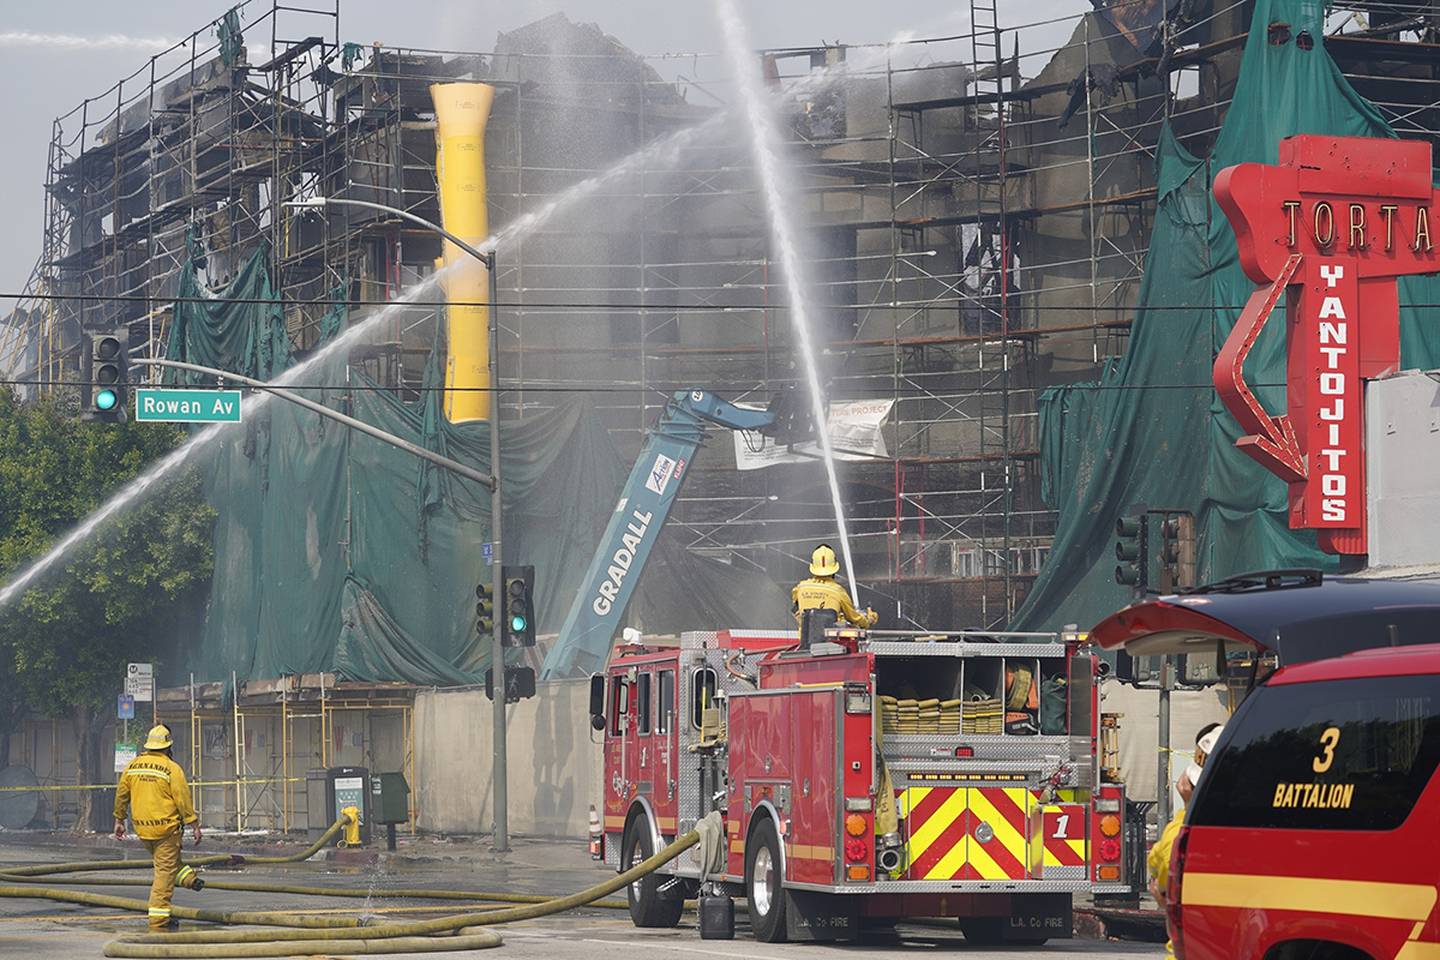 Firefighters work the scene of fire at a five-story housing complex under construction in East Los Angeles early on Sept. 16, 2020.